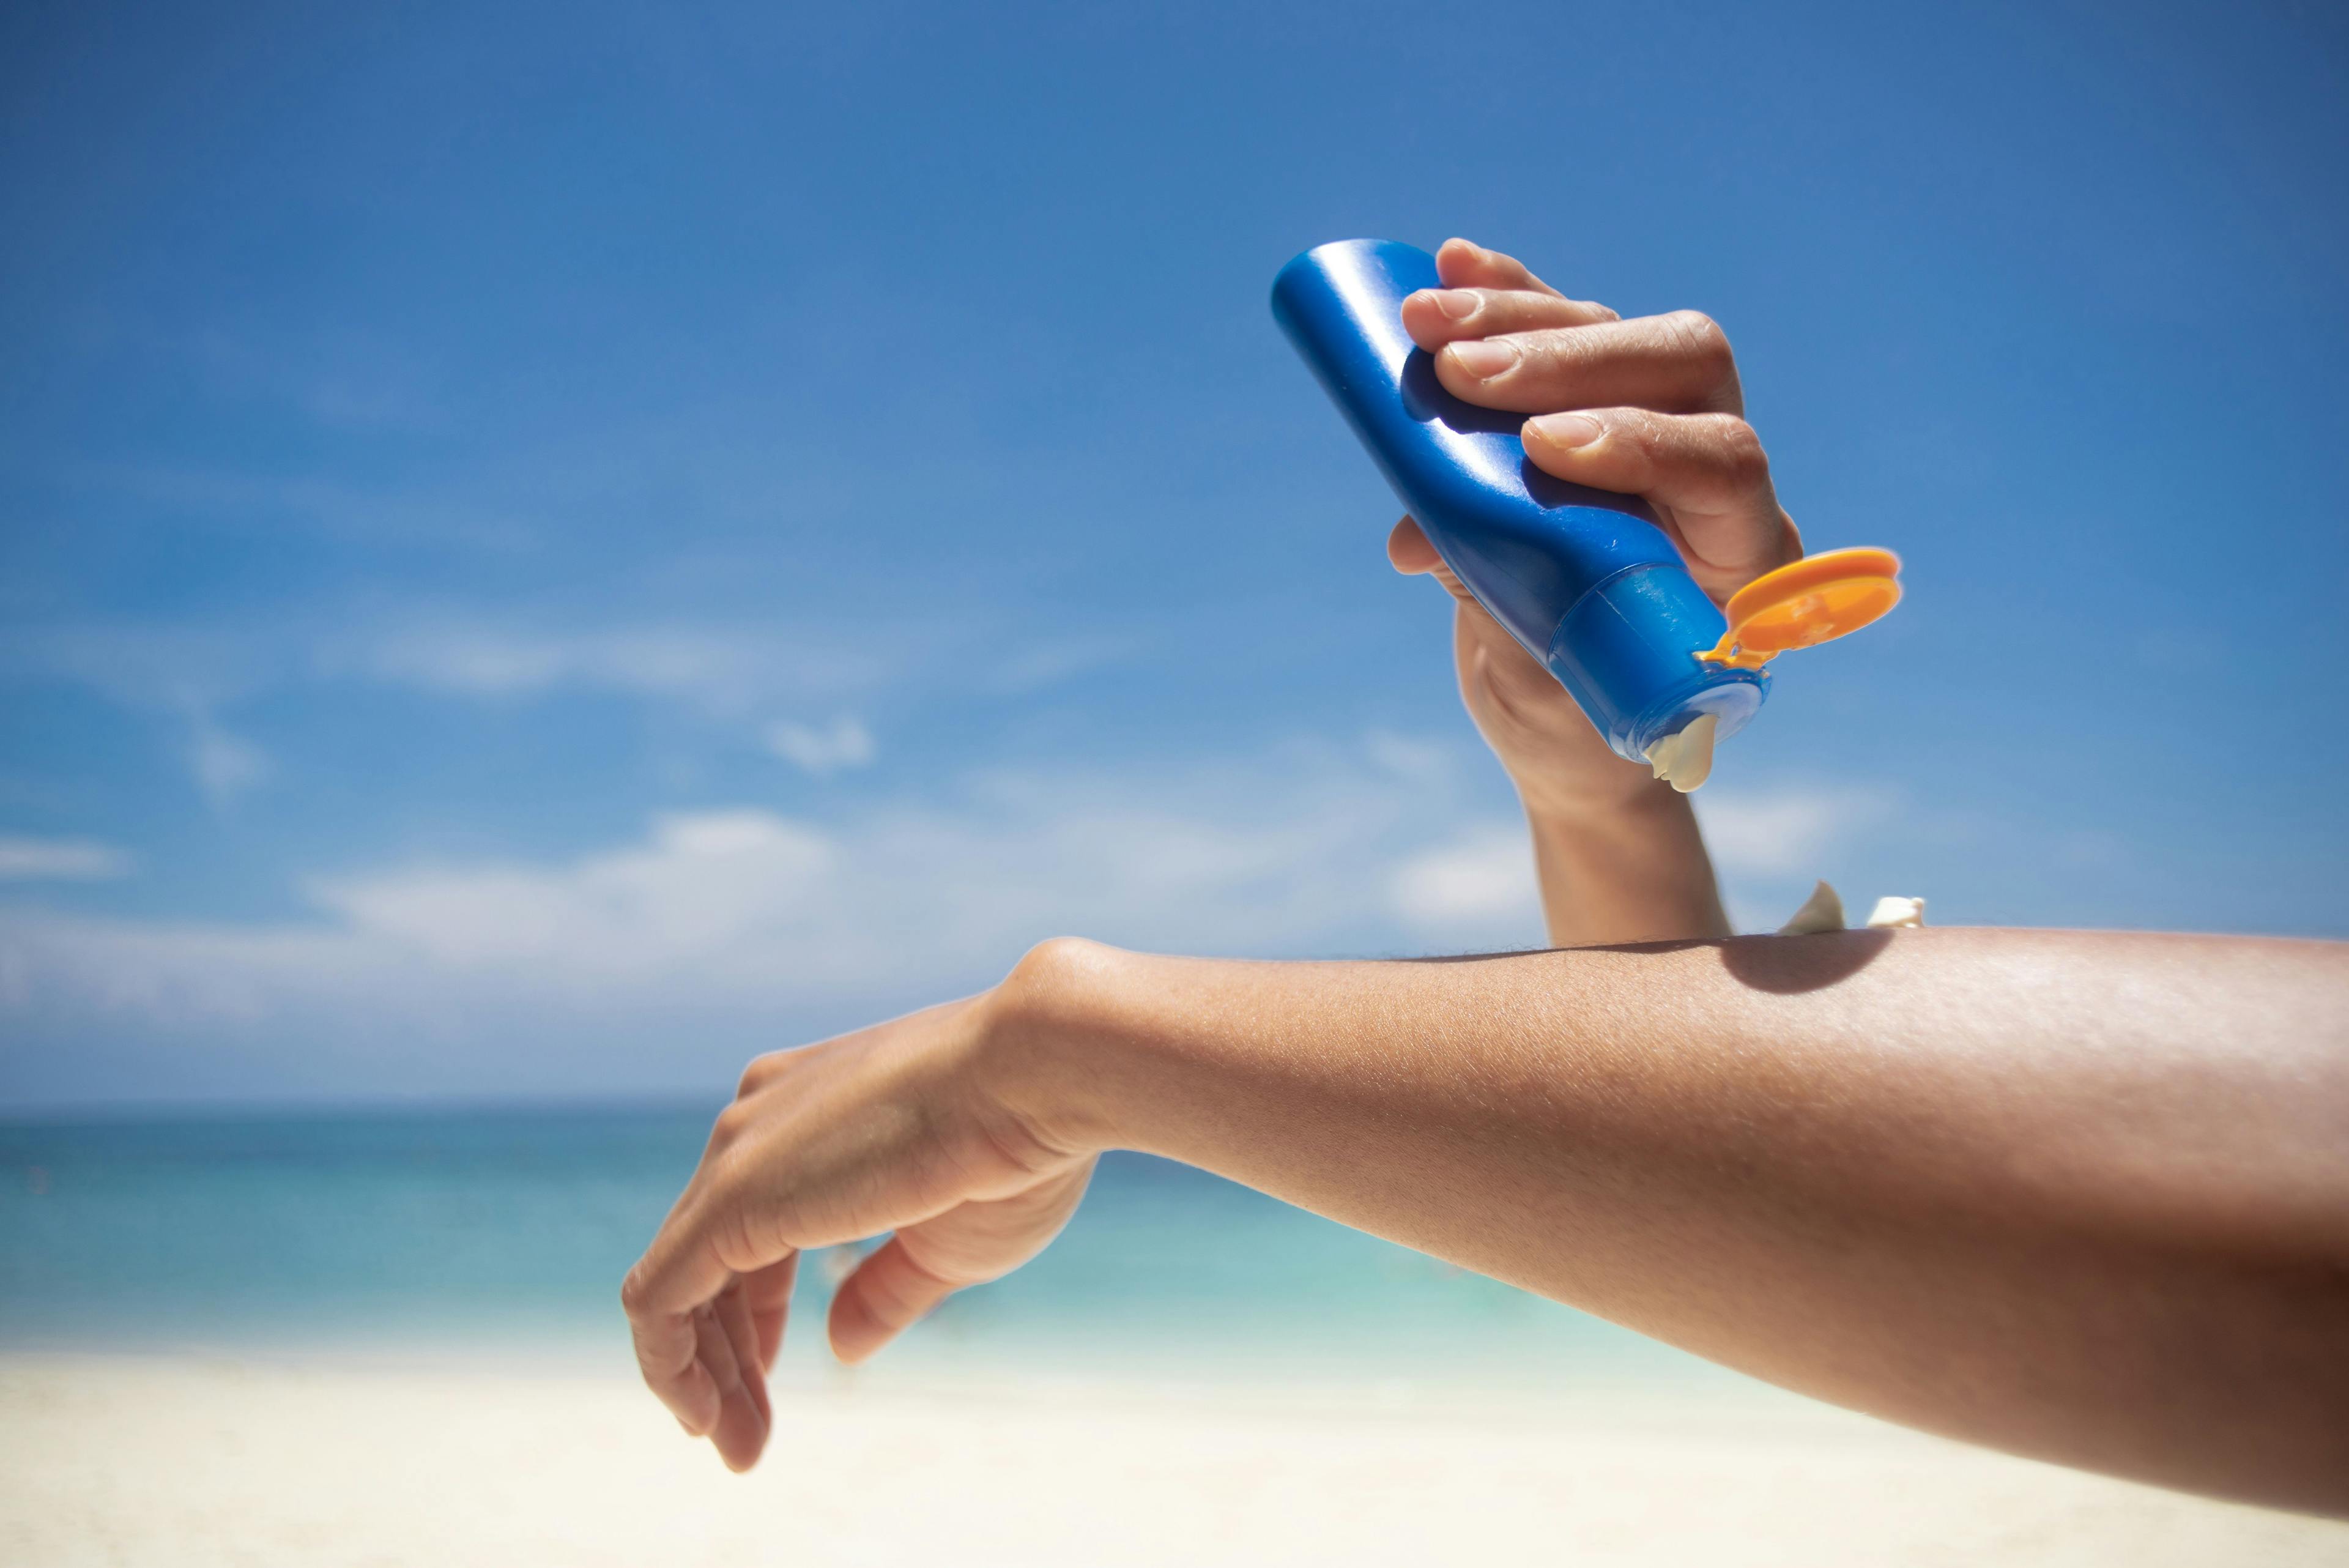 Woman applying sunscreen on her hands from a bottle on the beach with the sea in the background | Image Credit: lesterman - stock.adobe.com